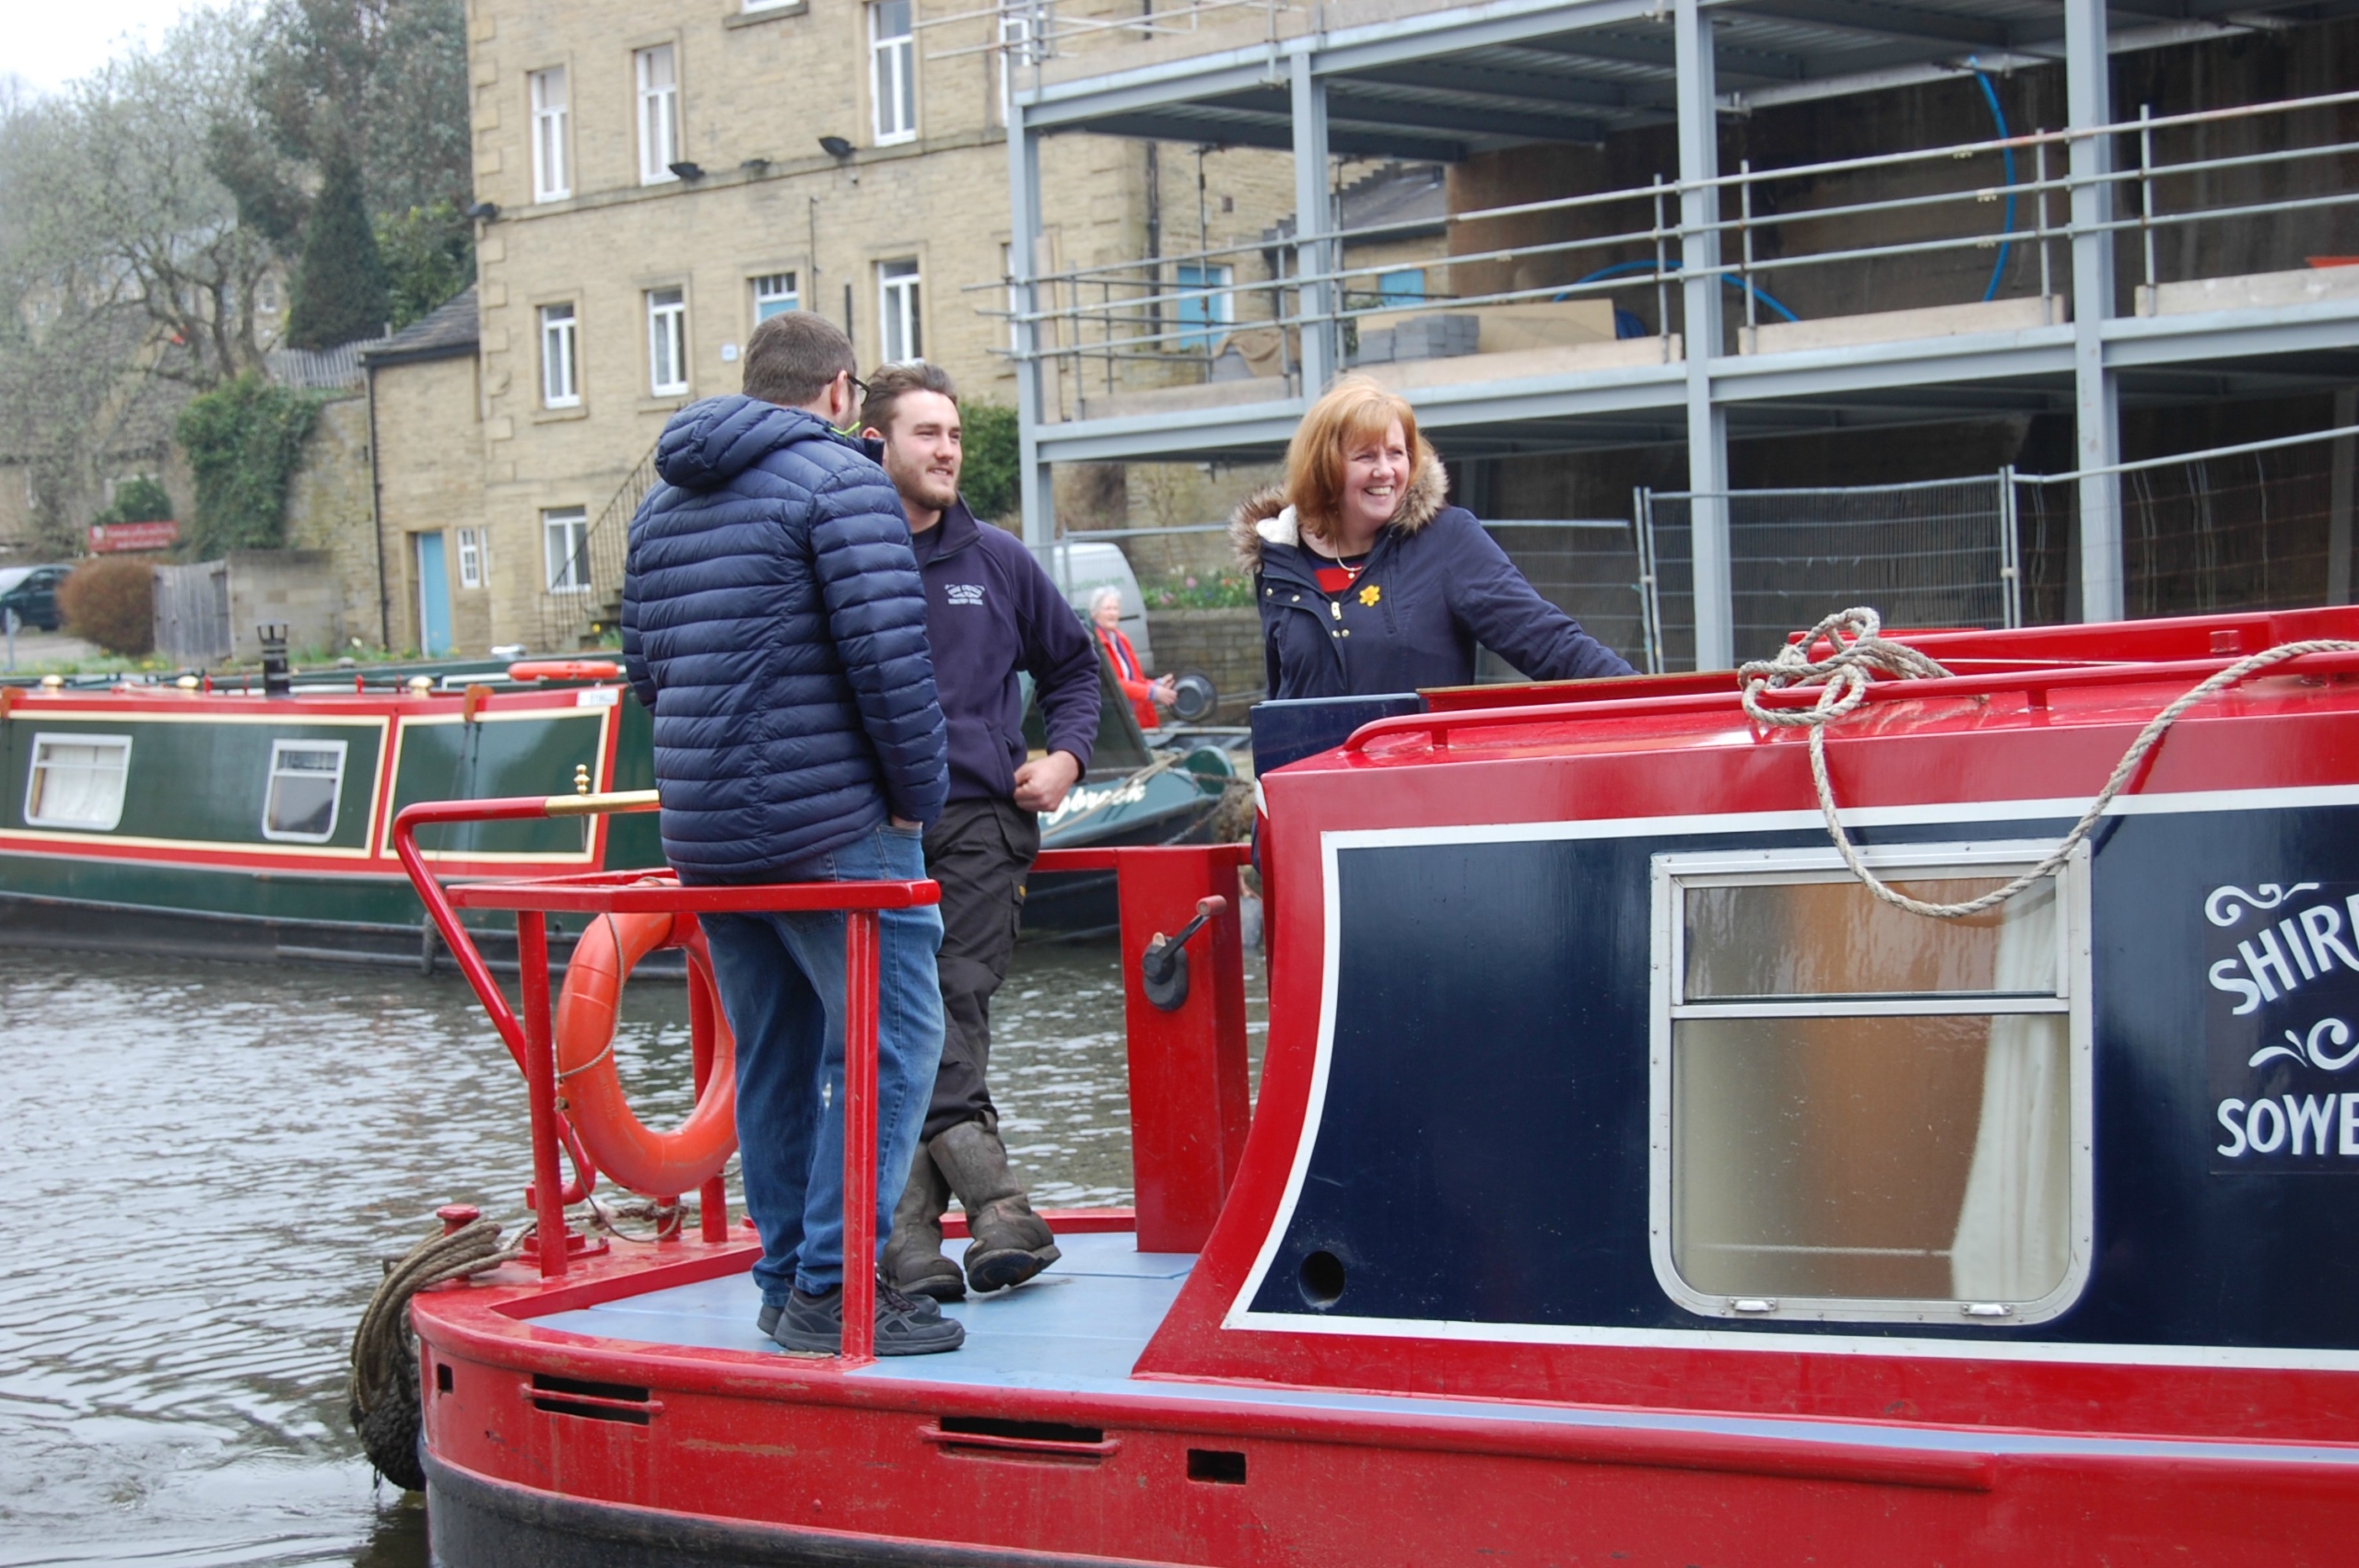 Try canal boating for free at our National Open Day